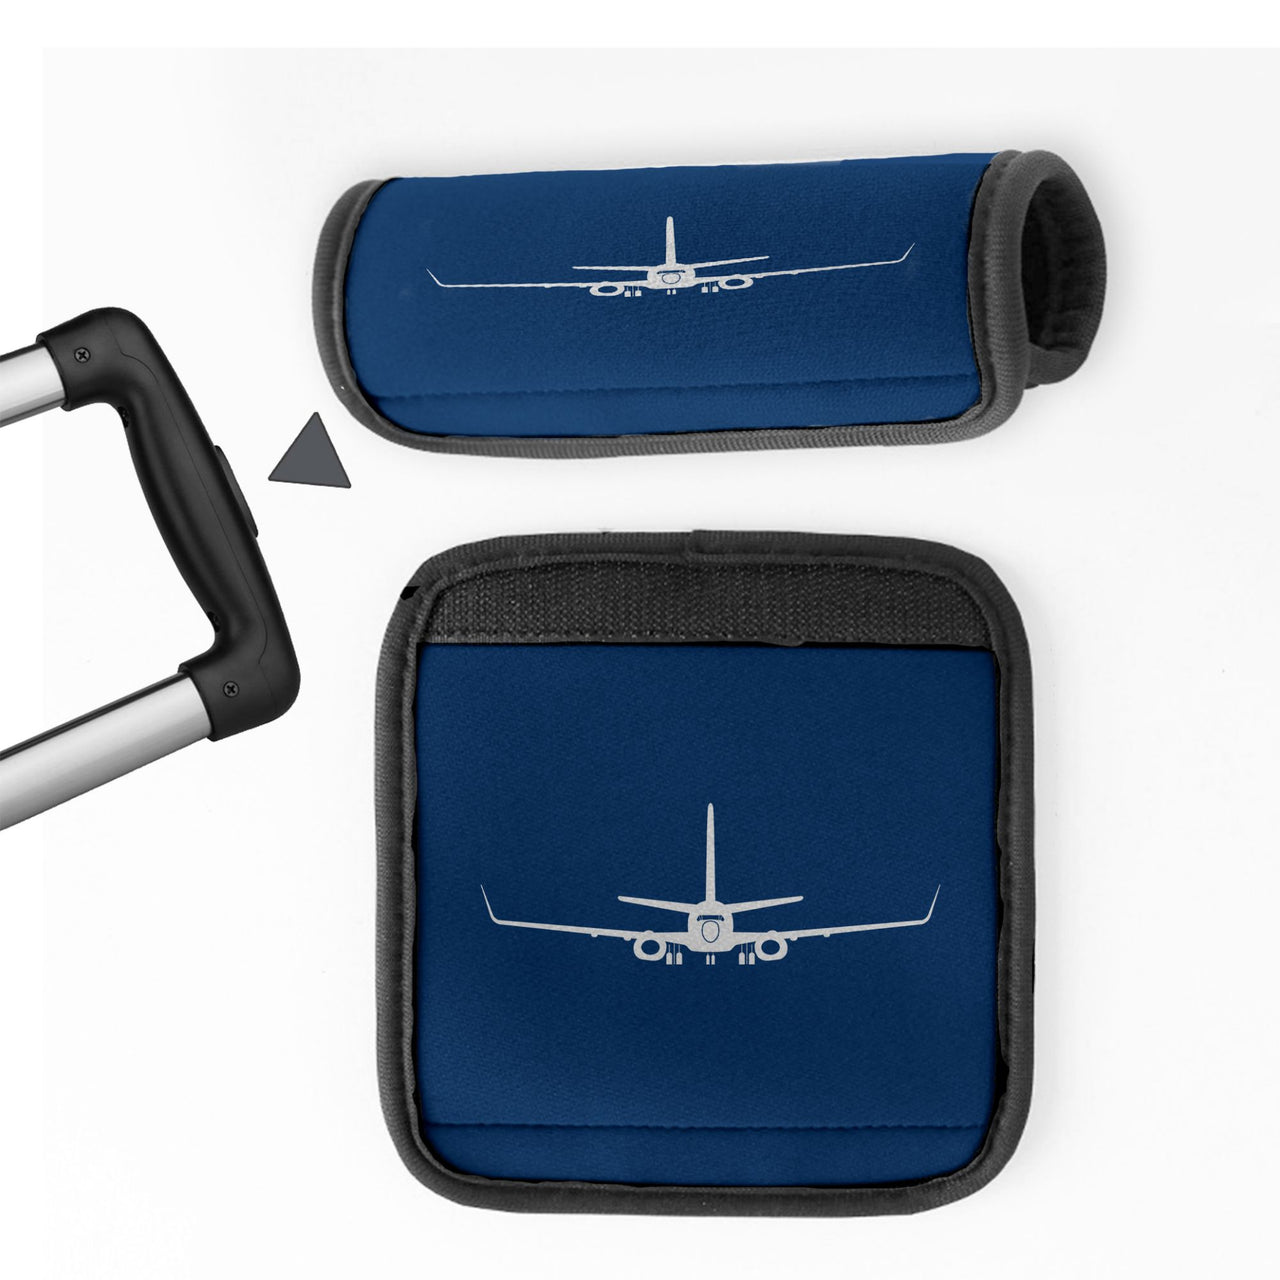 Boeing 737-800NG Silhouette Designed Neoprene Luggage Handle Covers